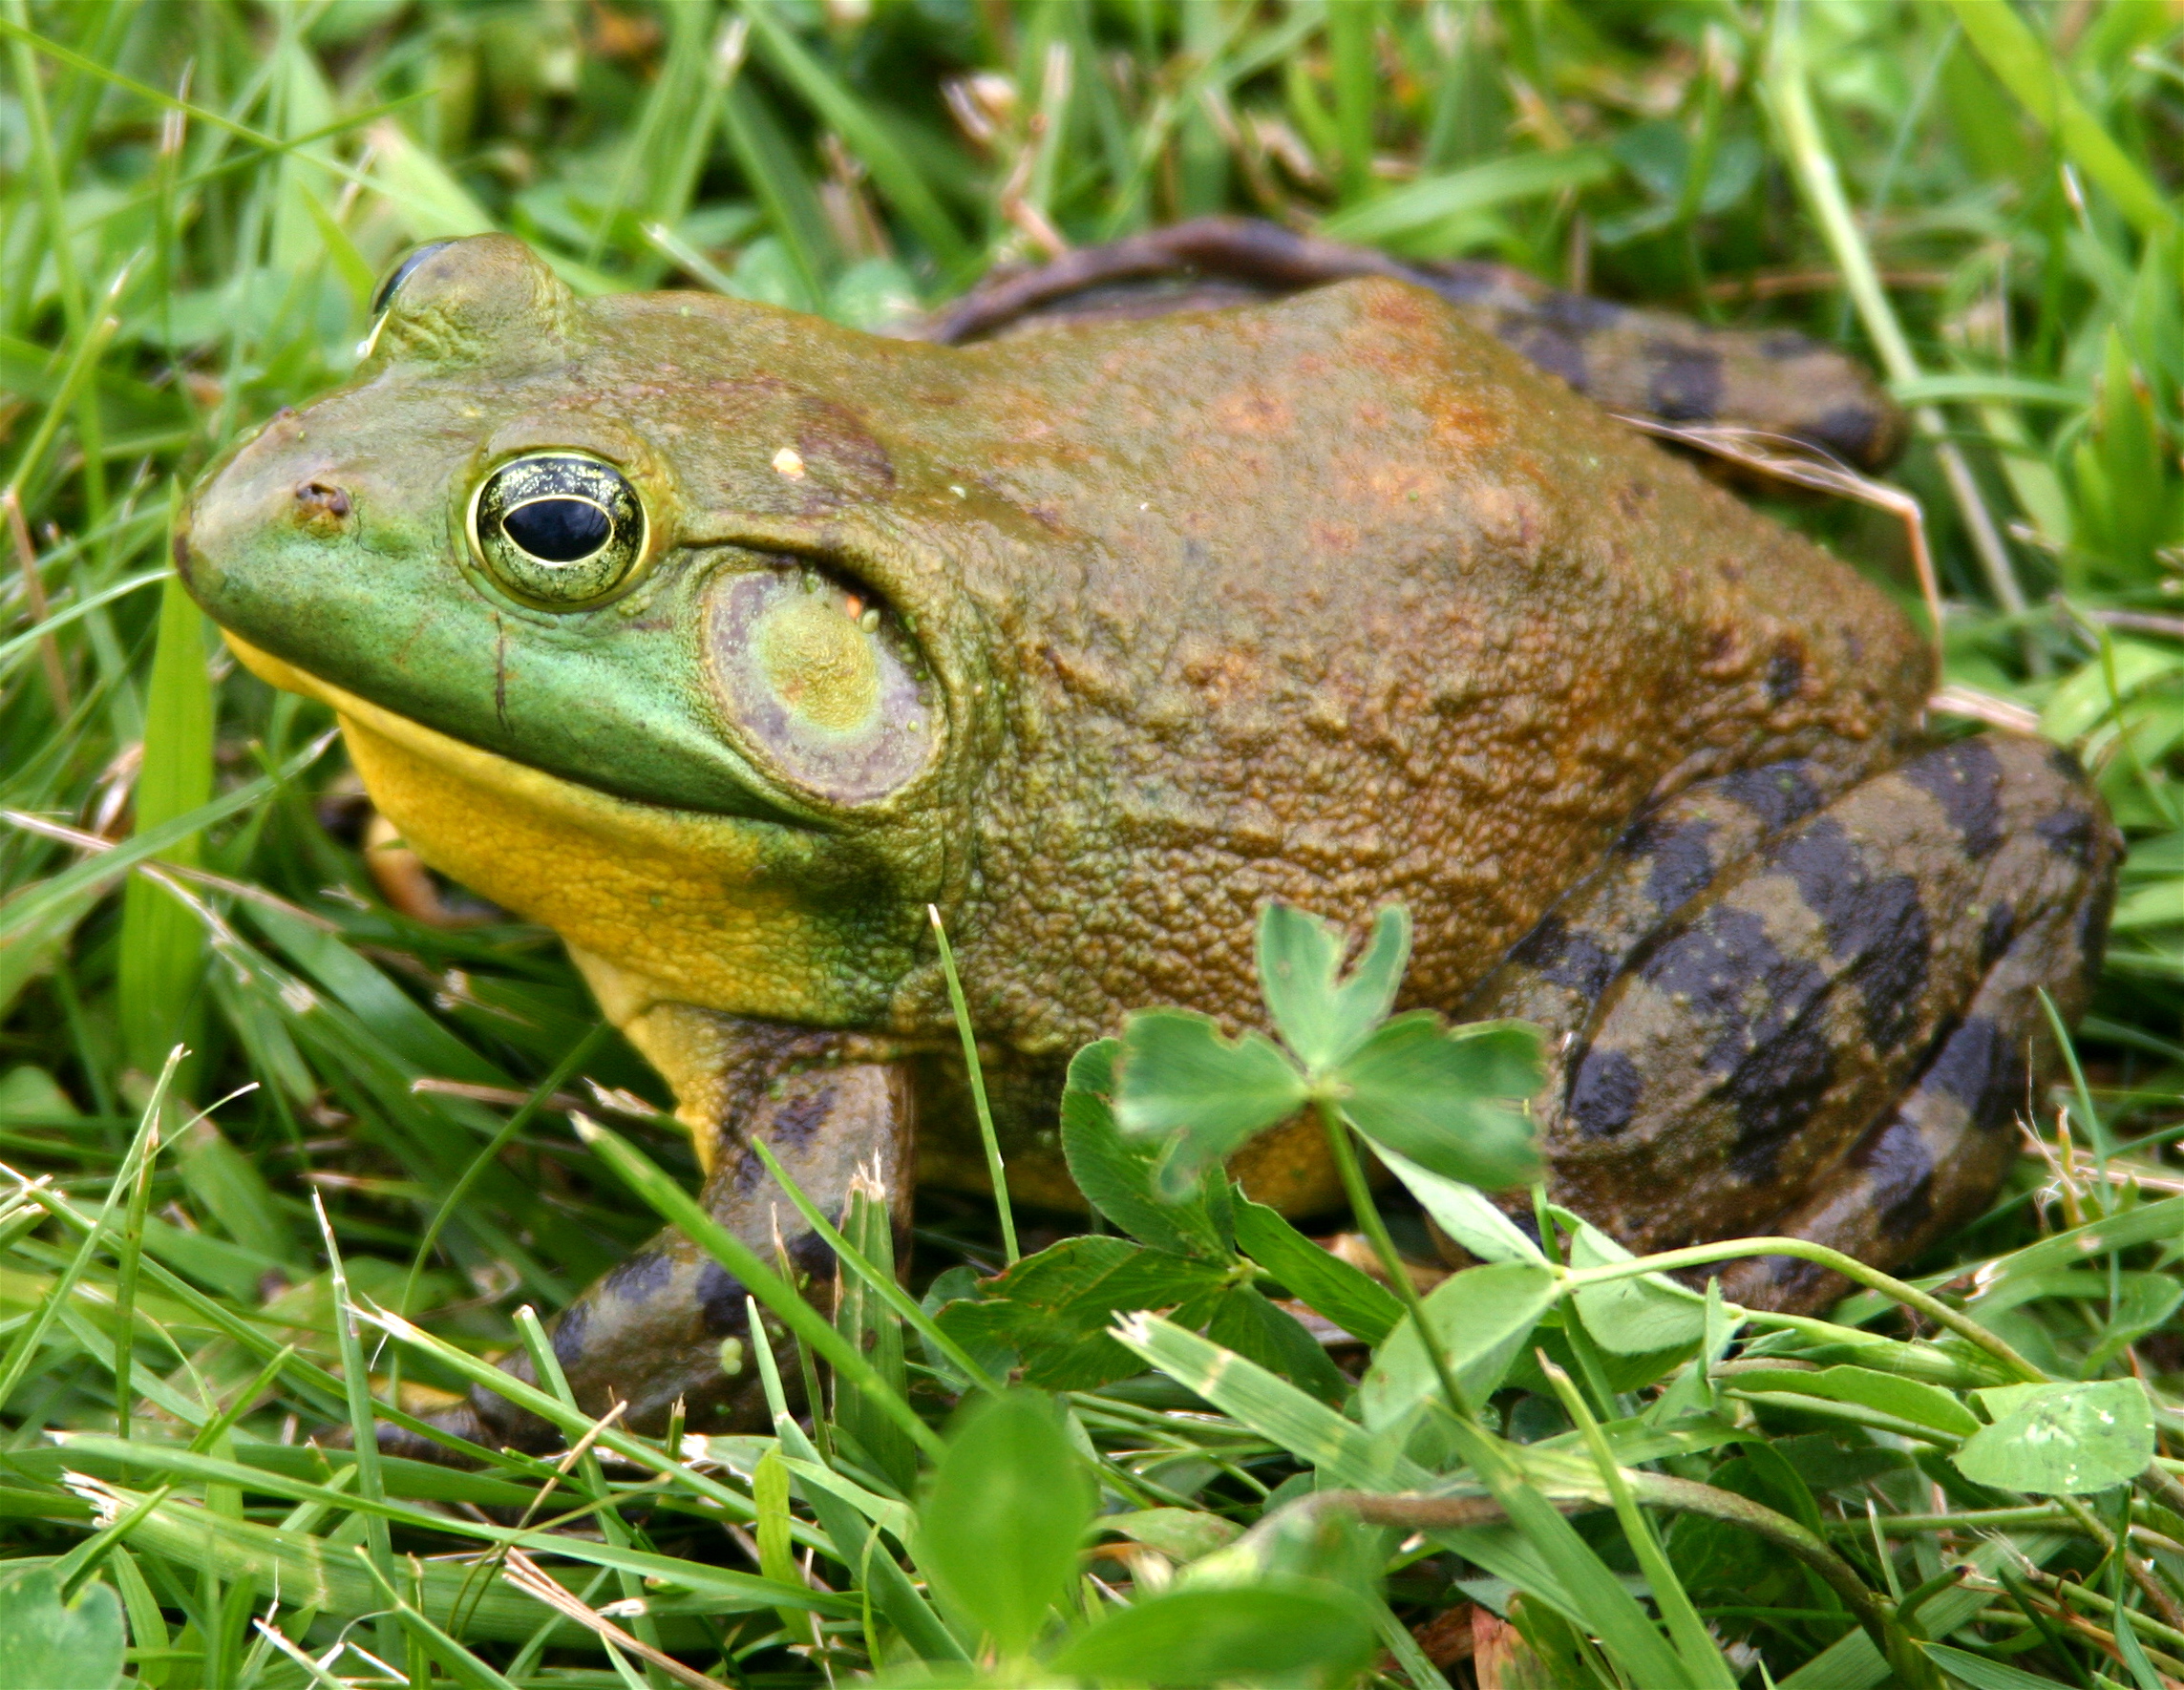 What classification is a bullfrog?